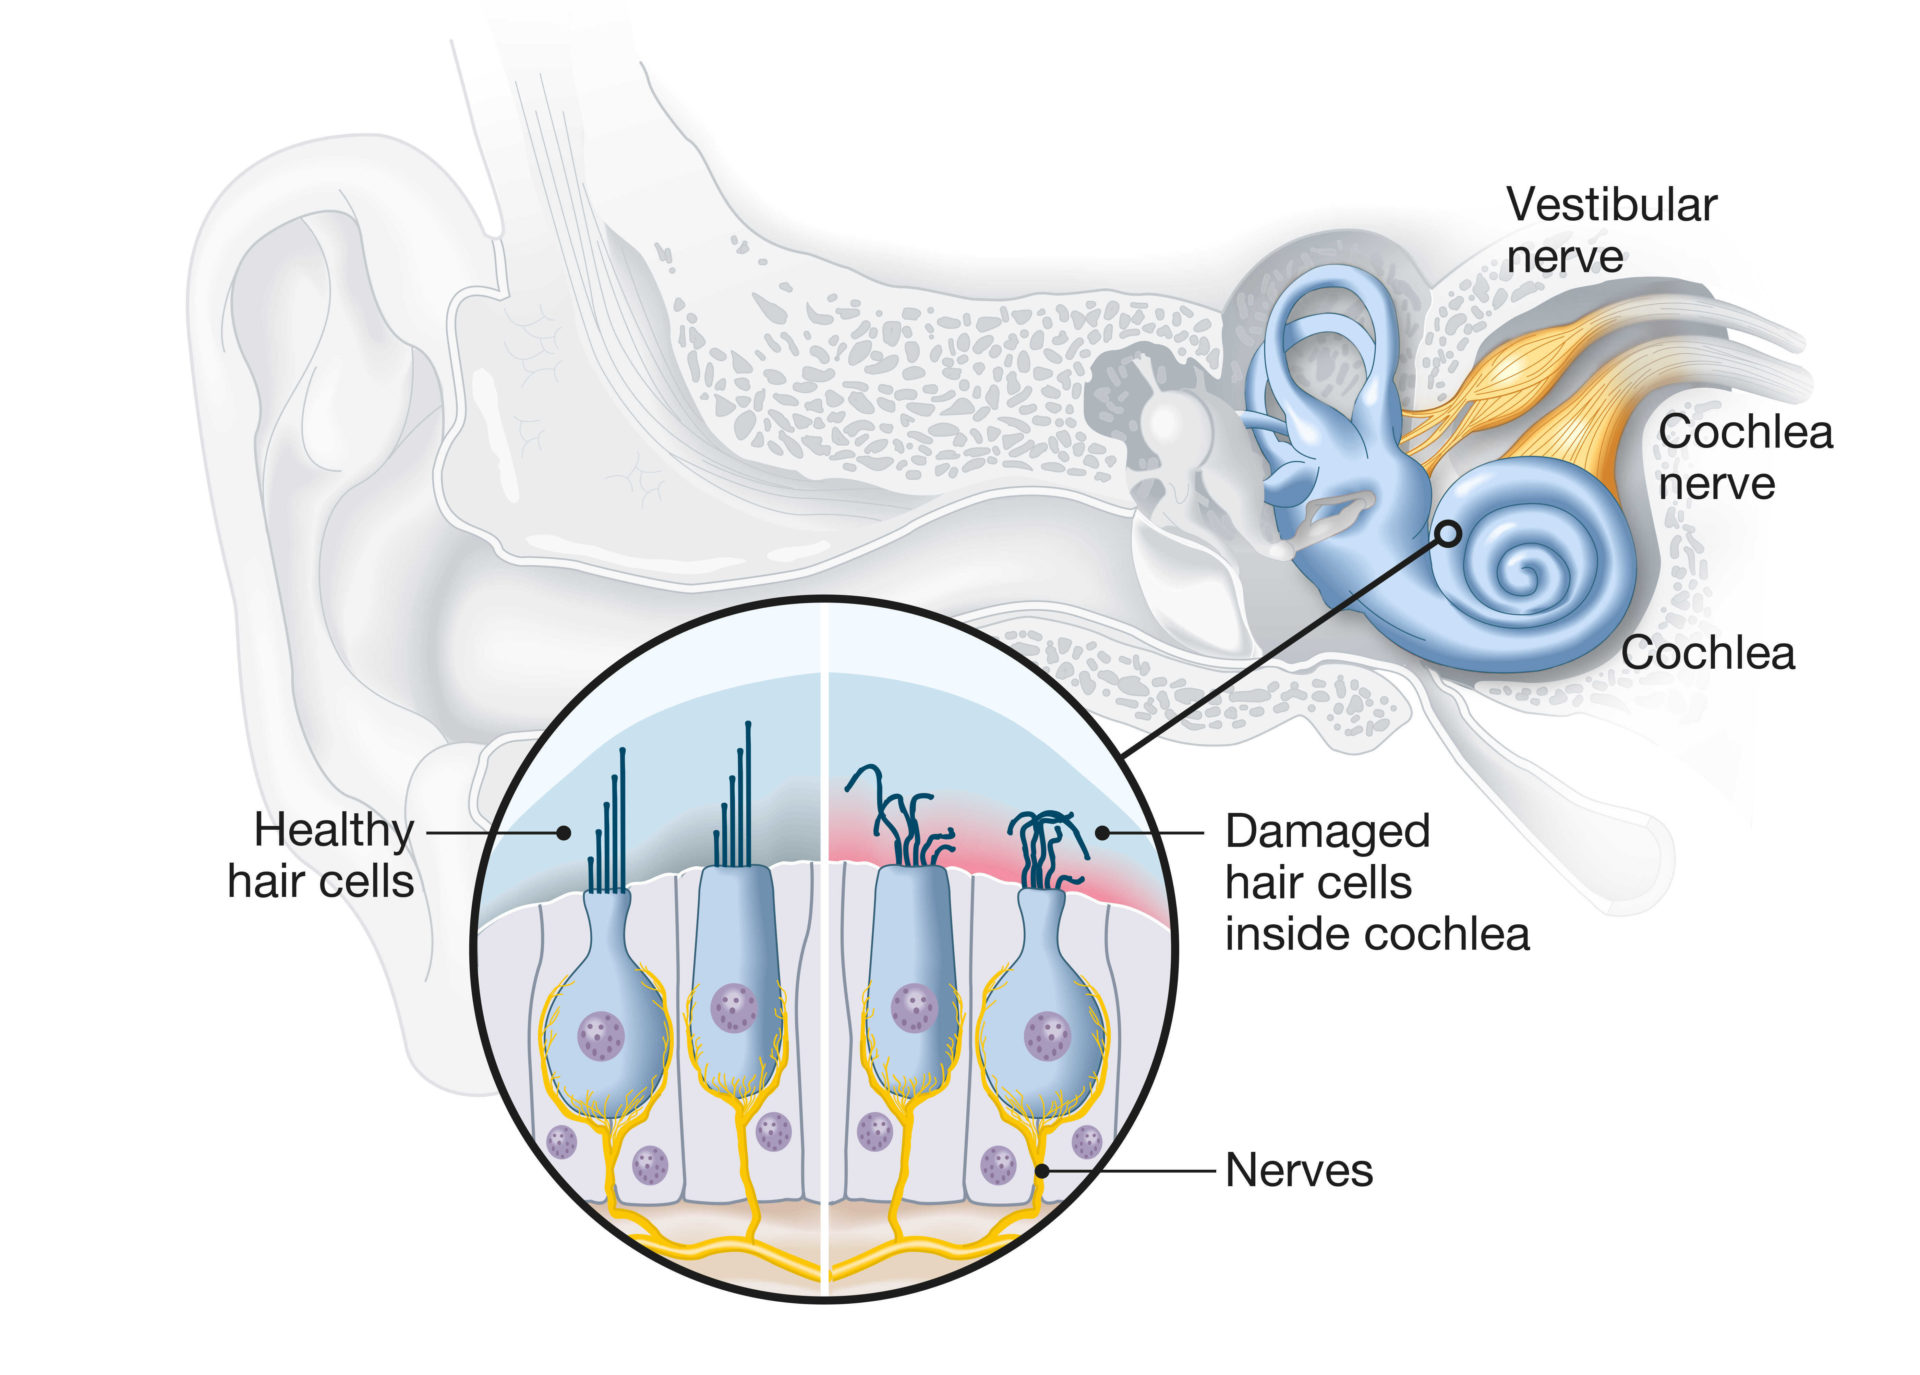 diagram of damaged hair cells within the cochlea in comparison to healthy hair cells